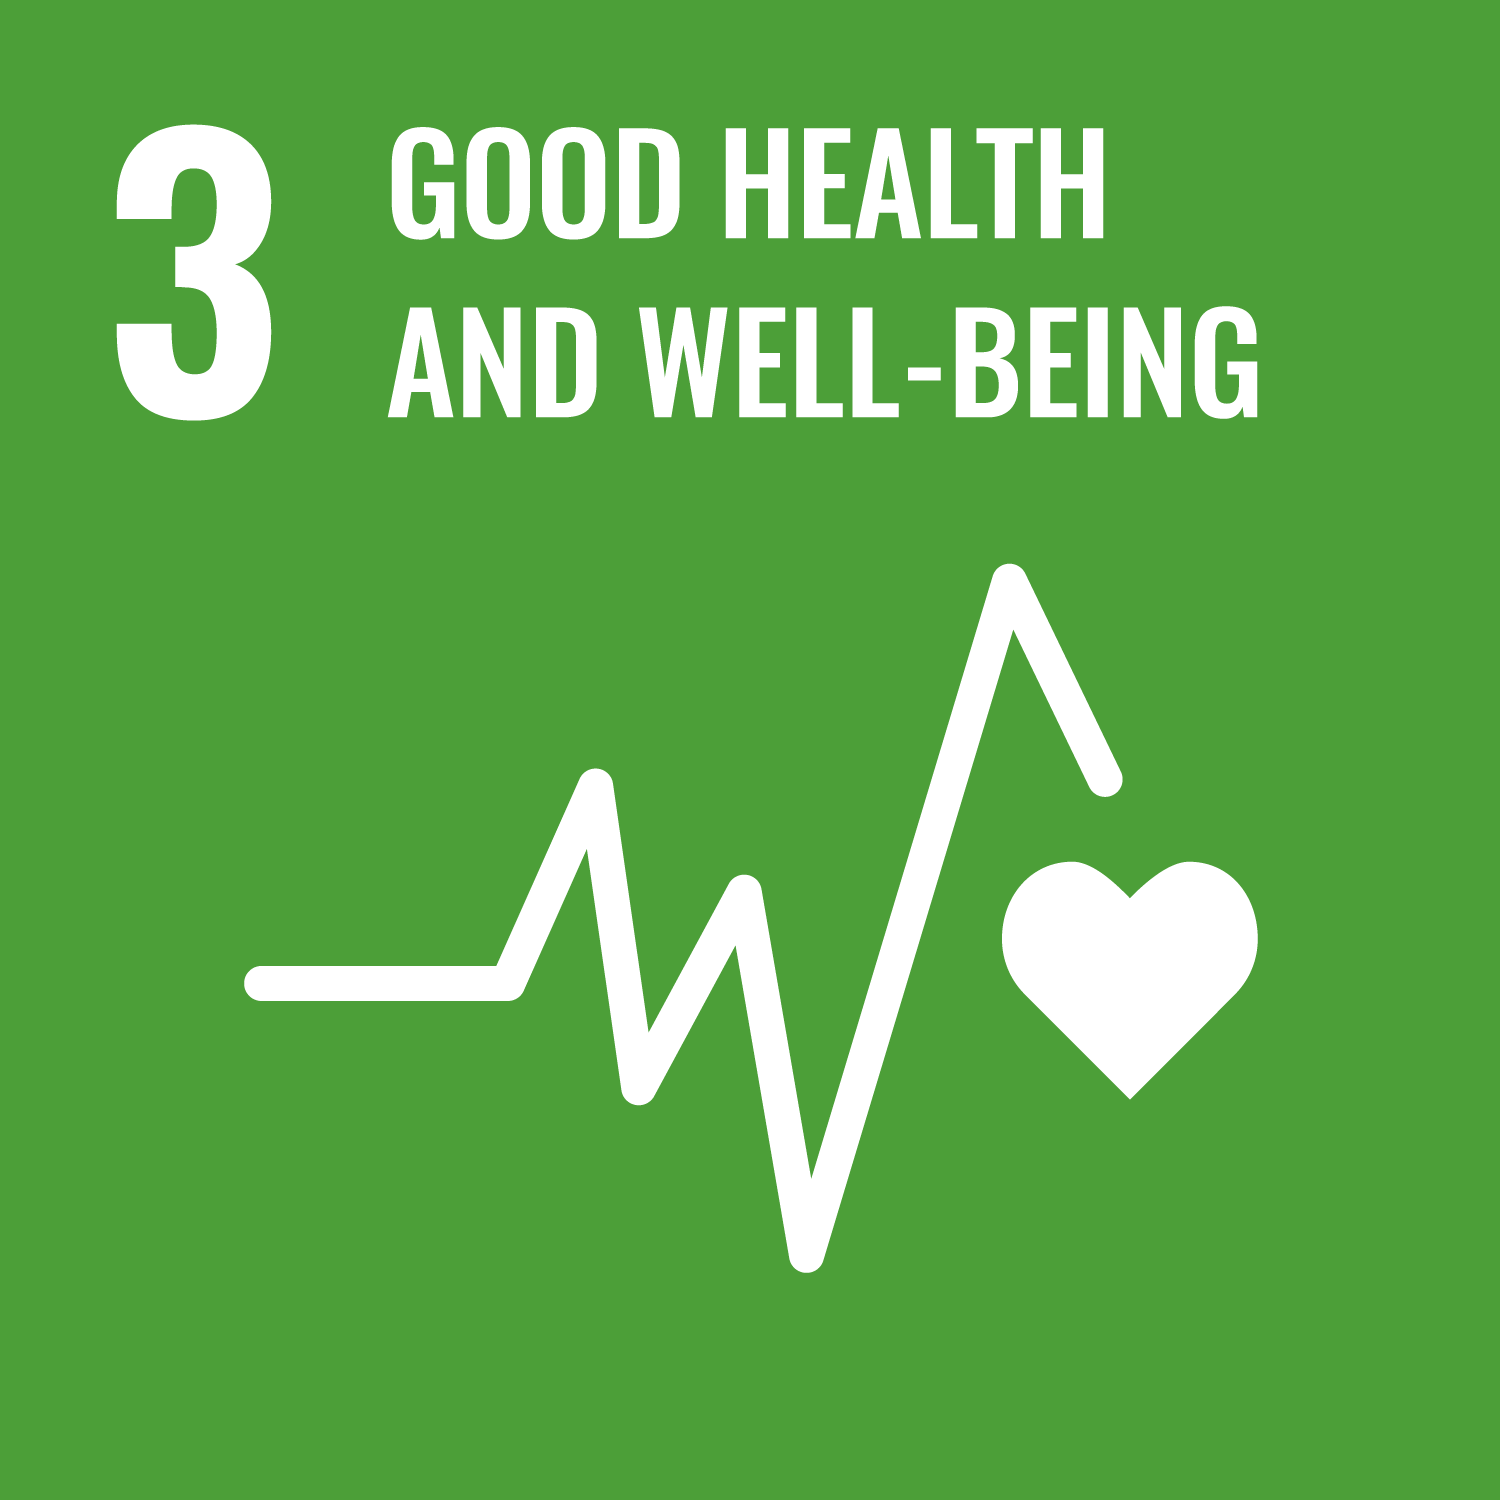 ［Goal 3］ Good Health and Well-Being